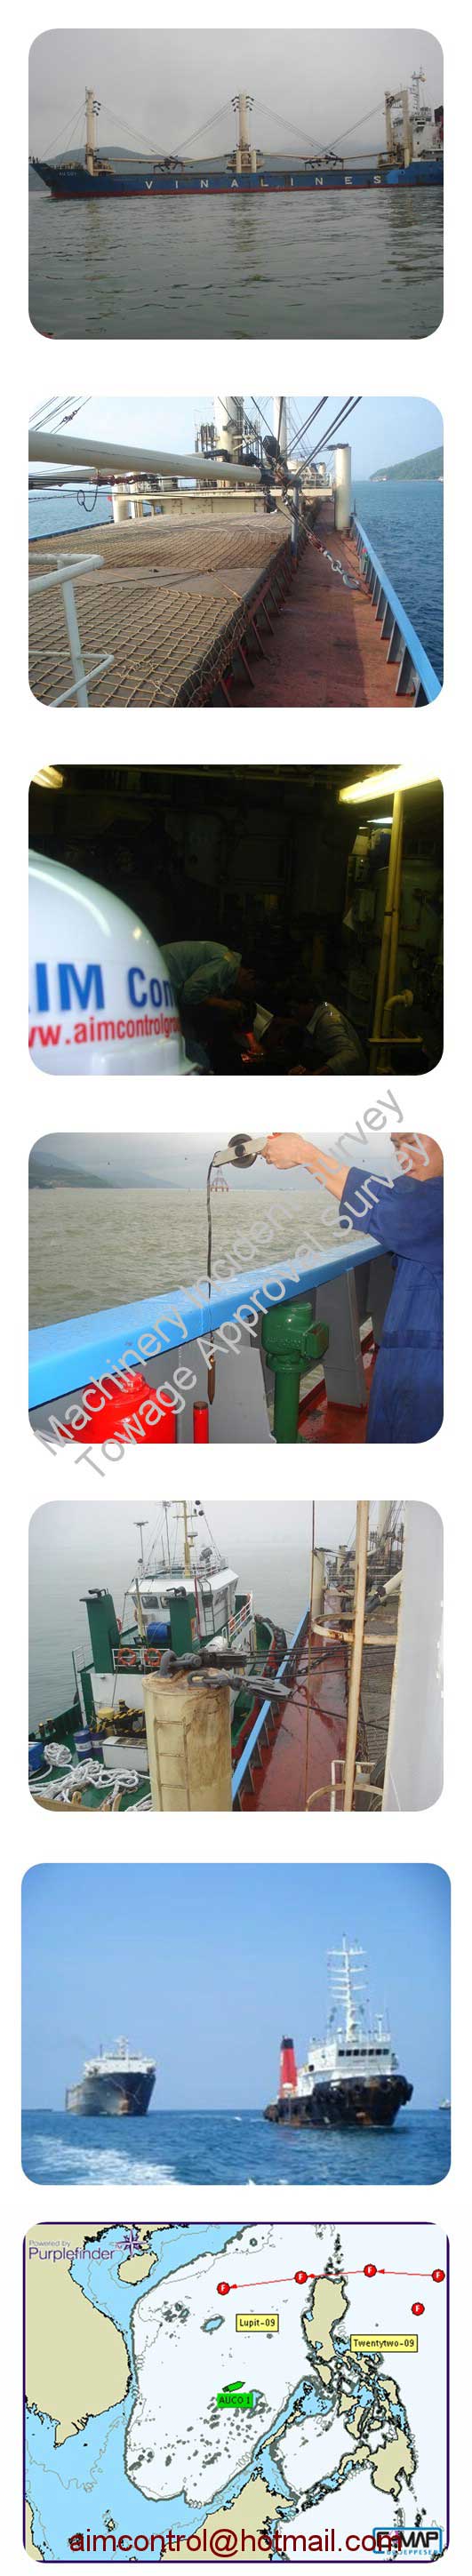 Towage_approval_survey_n_Towing_inspection_certification